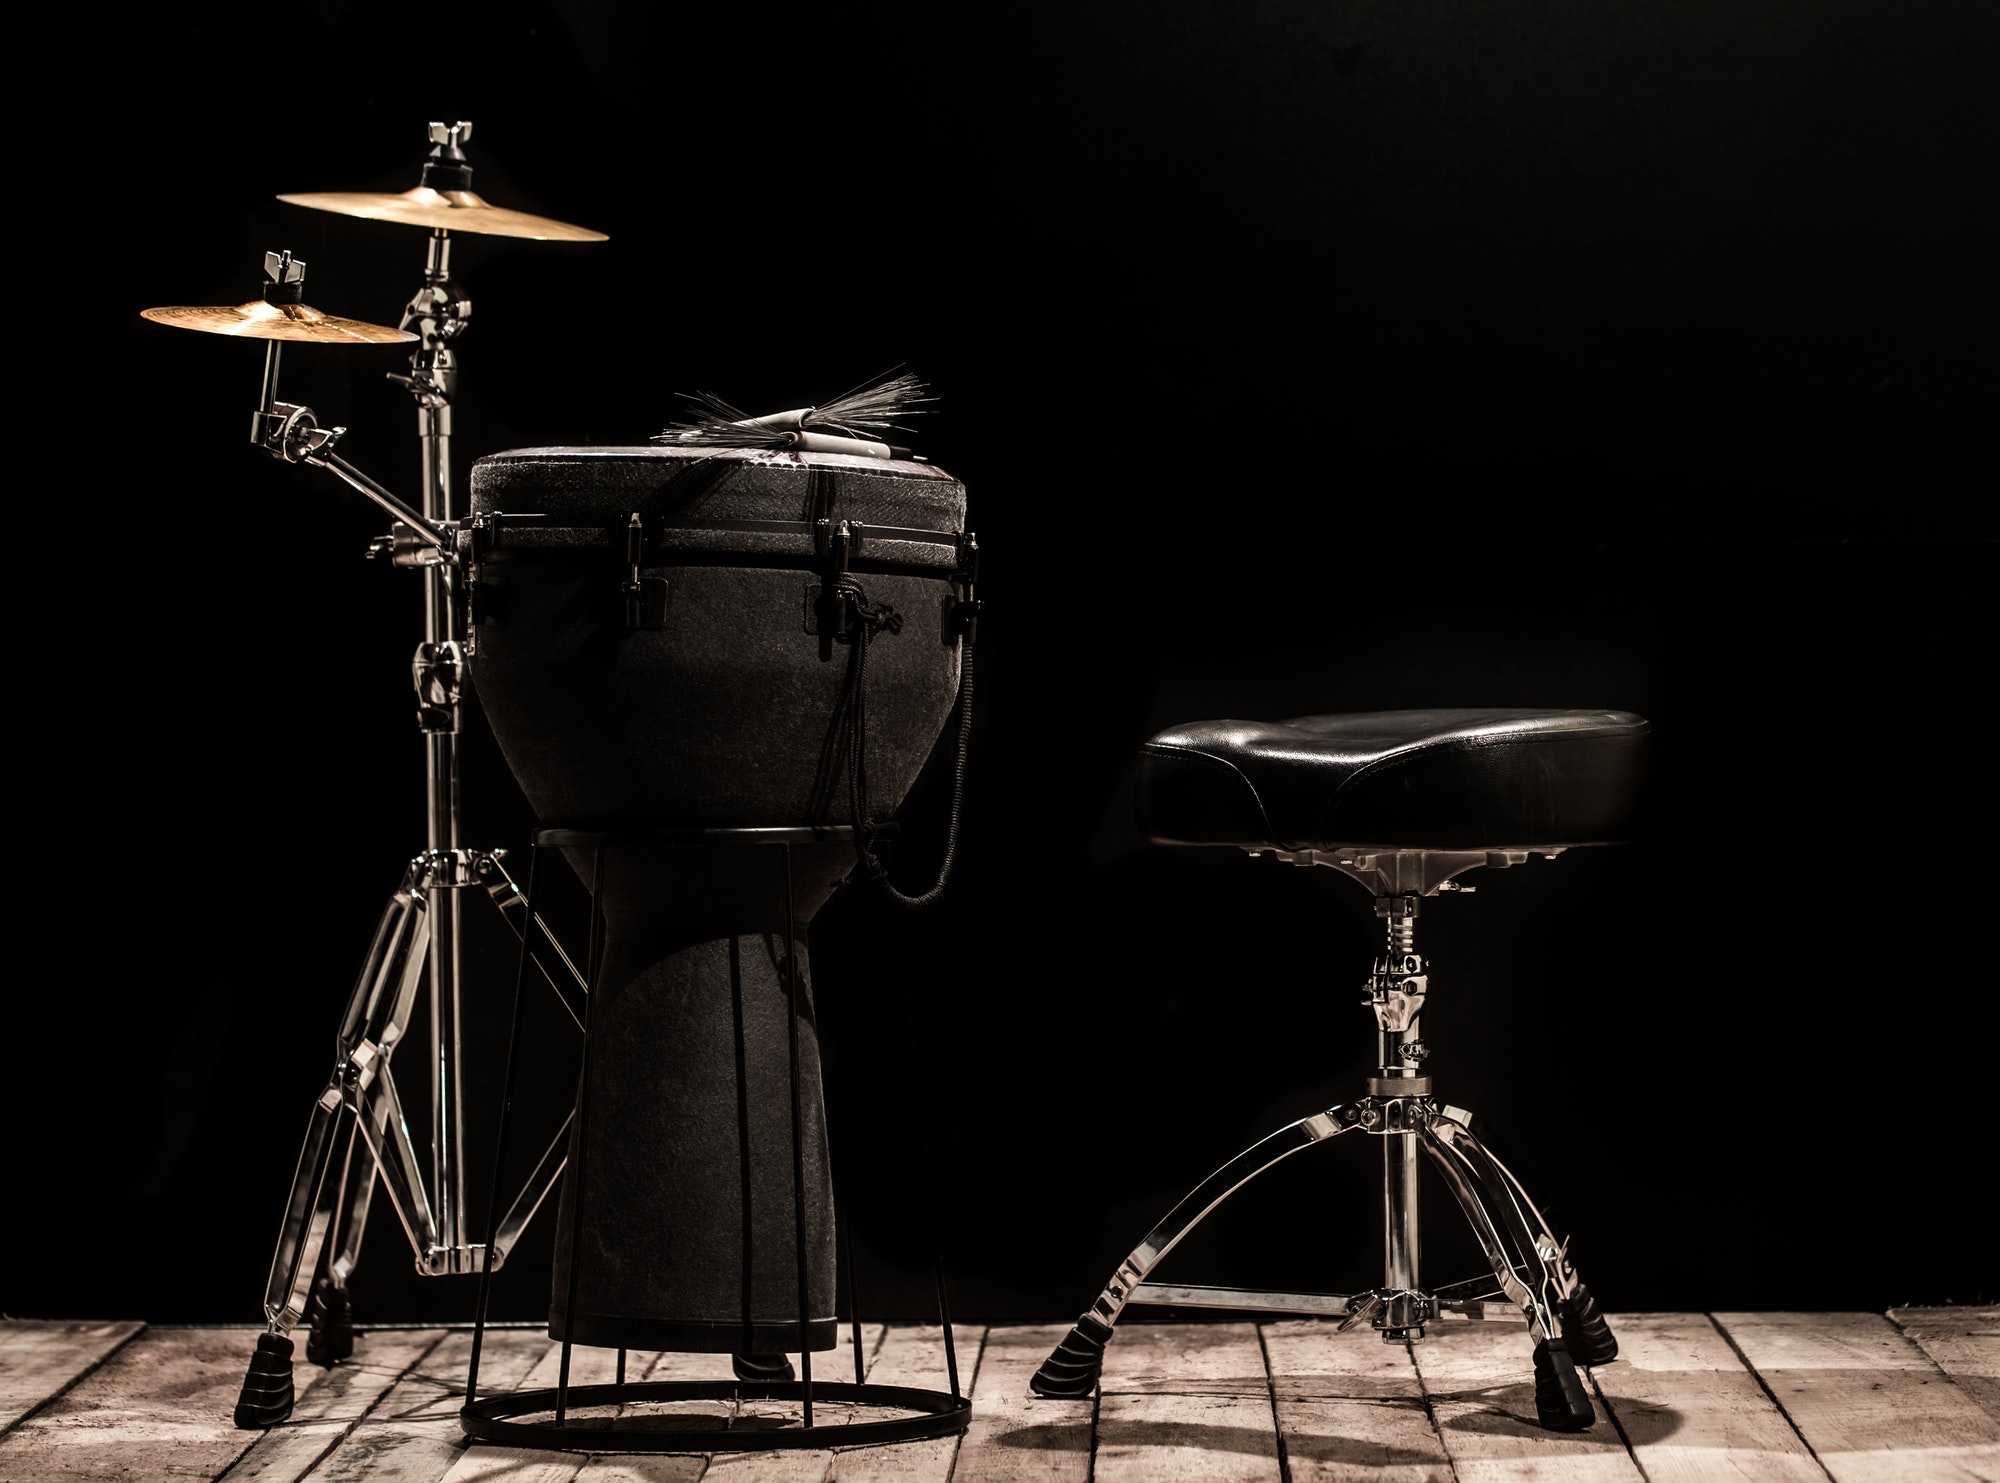 musical percussion instruments on black background